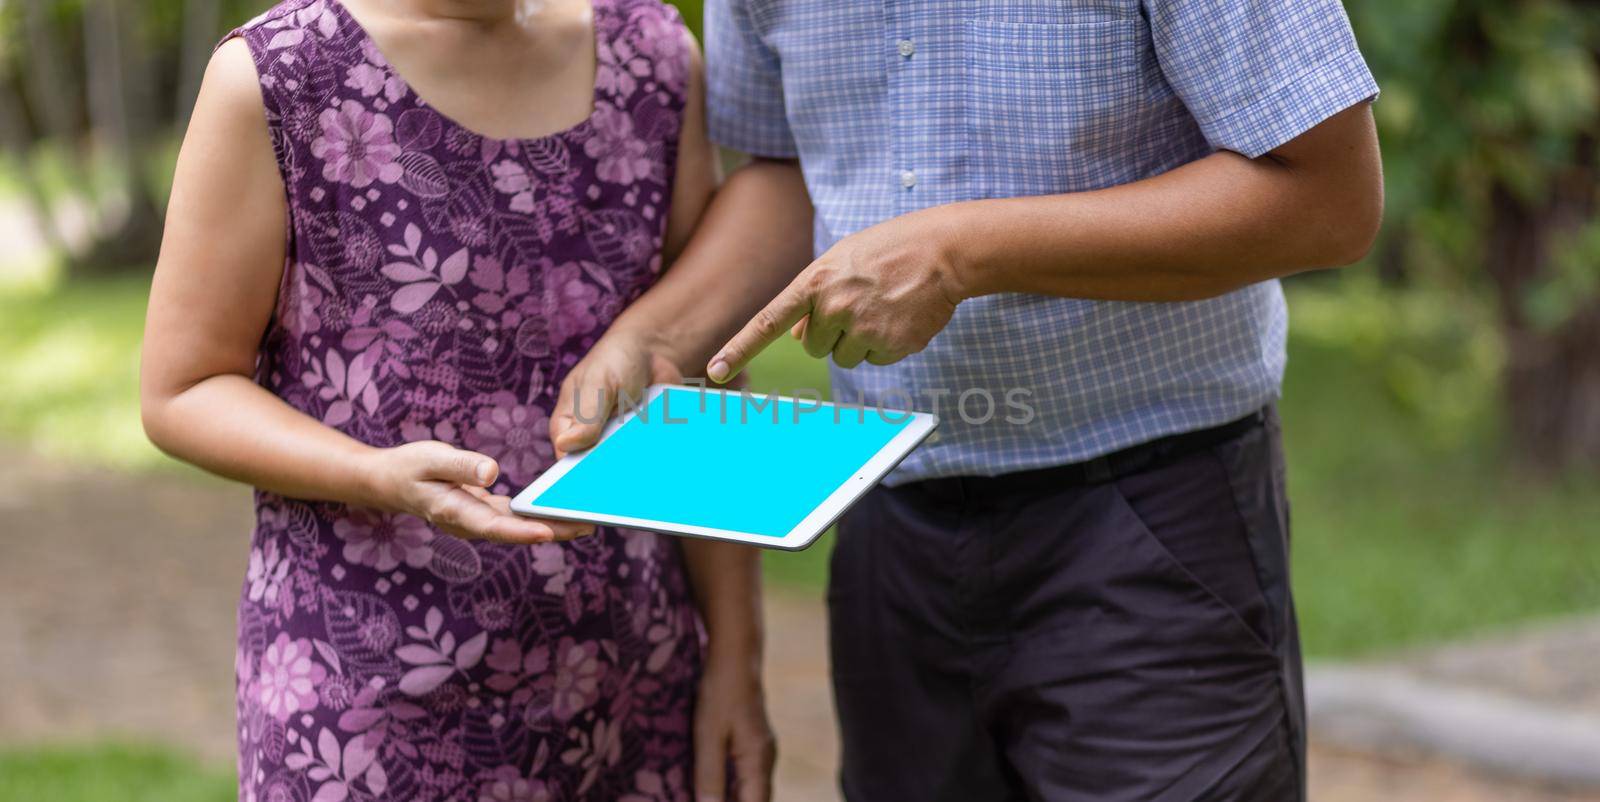 Asian middle-aged couple talking and look at tablet together in backyard.